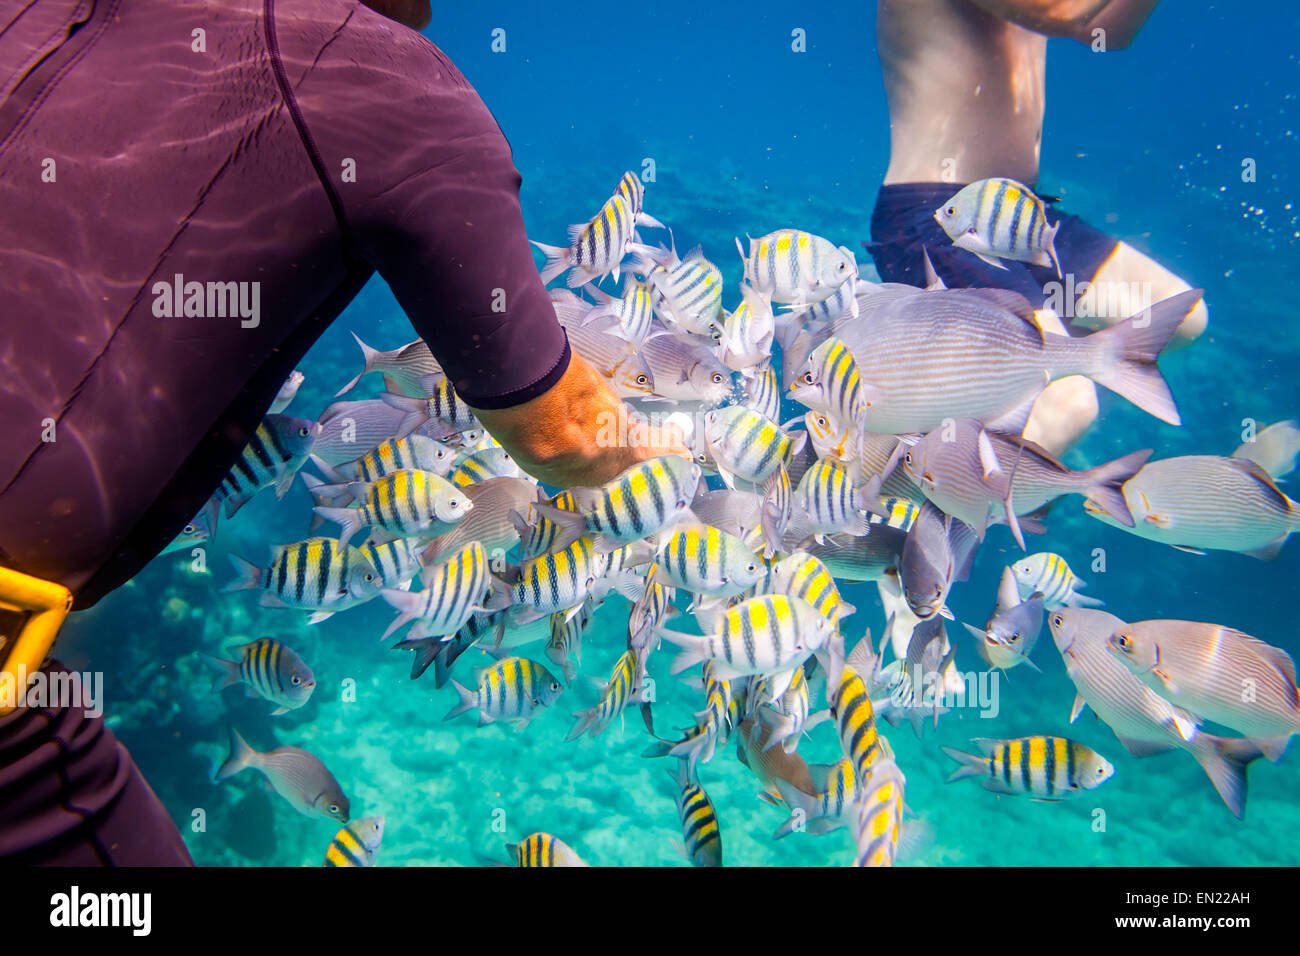 Man feeds the tropical fish under water.Ocean coral reef. Warning - authentic shooting underwater in challenging conditions. A l Stock Photo